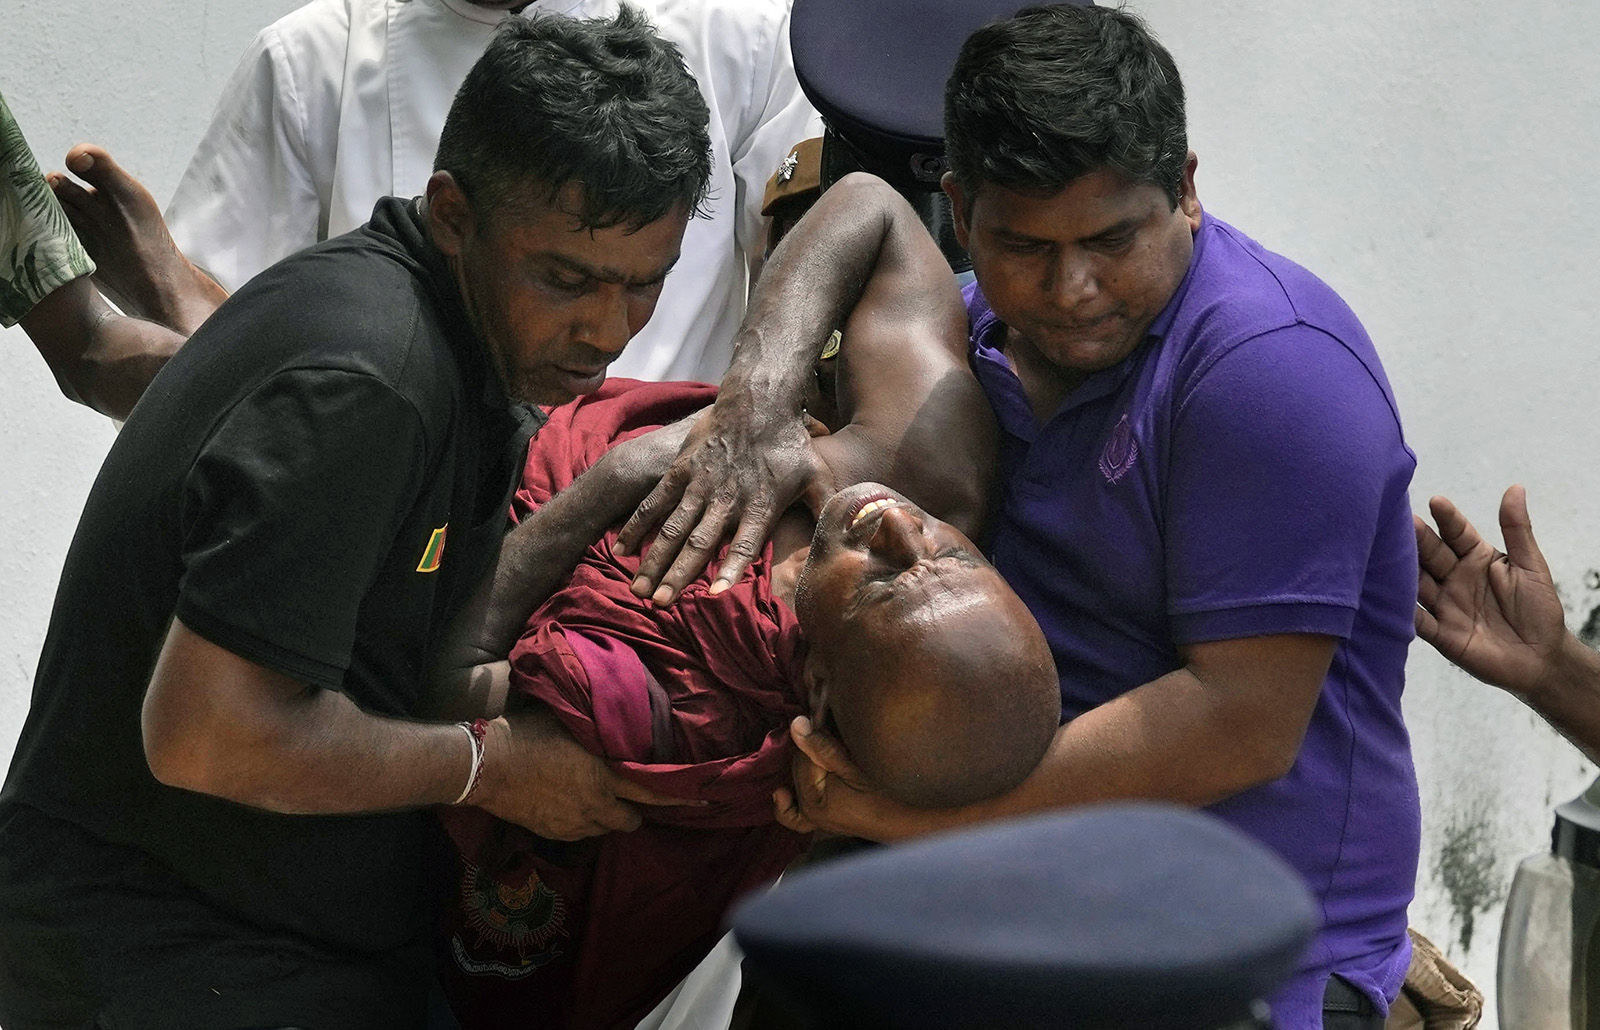 An injured Sri Lankan Buddhist monk is carried away among many other anti-government protesters who were injured after being attacked by pro-government supporters outside prime minister Mahinda Rajapaksa's residence in Colombo, Sri Lanka, Monday, May 9, 2022. Government supporters on Monday attacked protesters who have been camped outside the offices of Sri Lanka's president and prime minster, as trade unions began a “Week of Protests” demanding the government change and its president to step down over the country’s worst economic crisis in memory. (AP Photo/Eranga Jayawardena)